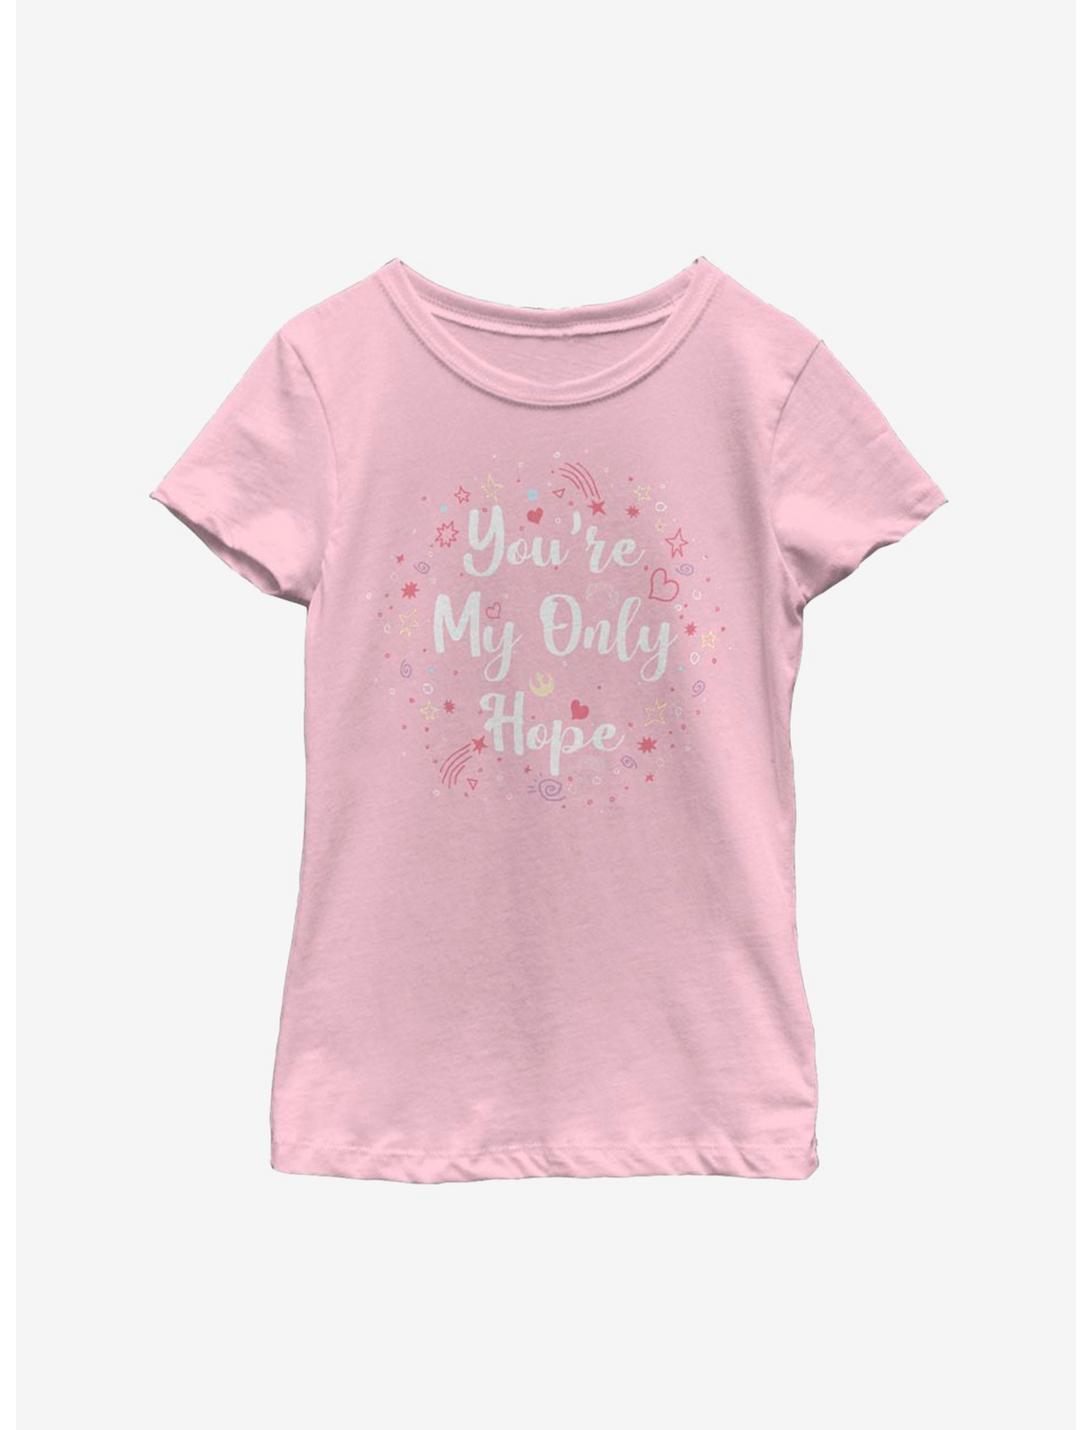 Star Wars Only Hope Youth Girls T-Shirt, PINK, hi-res